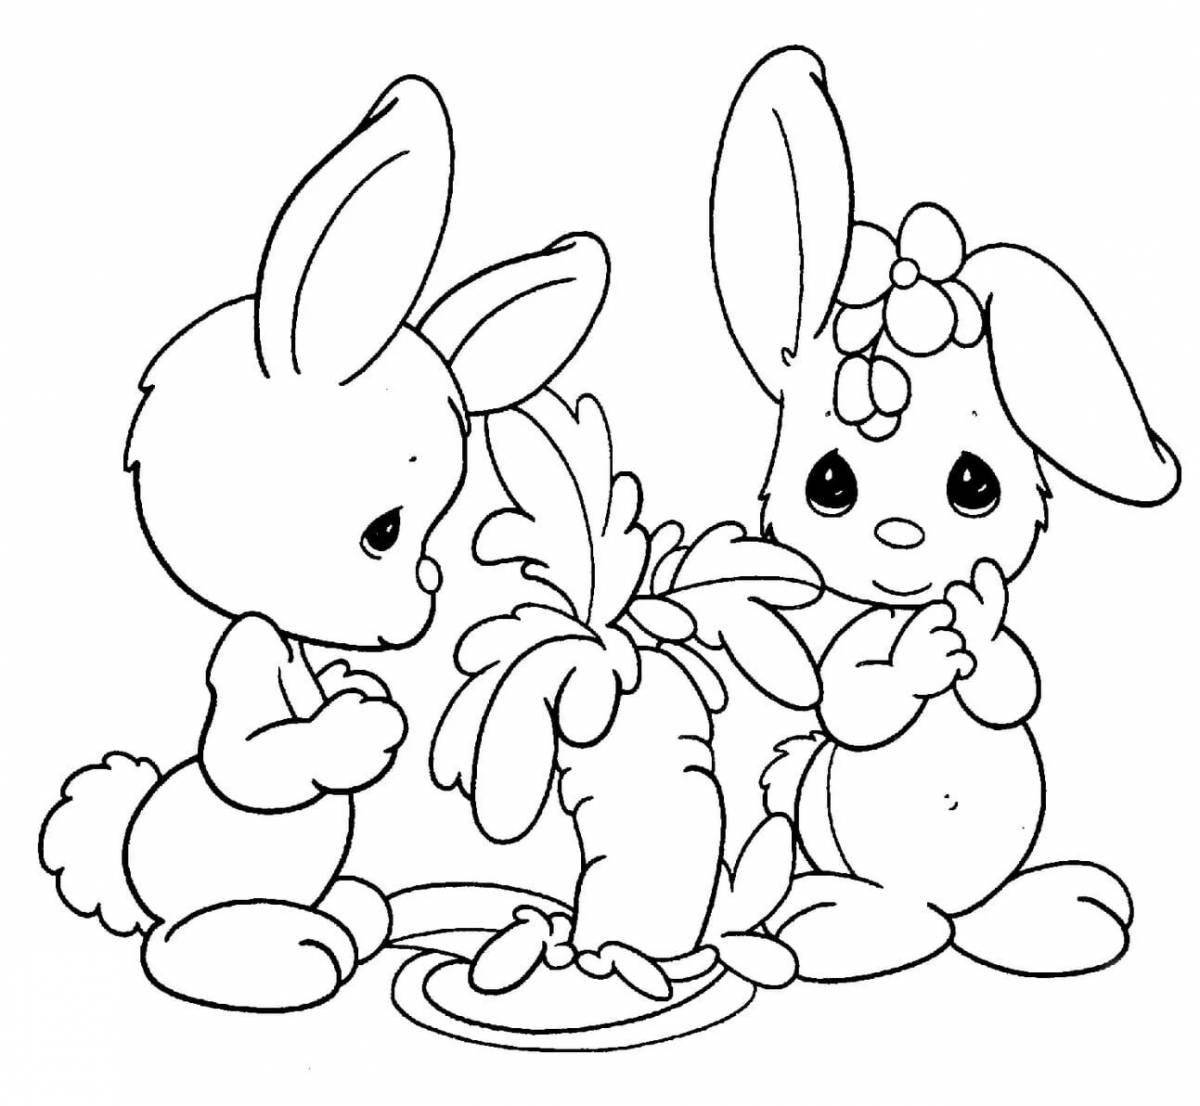 Coloring rabbits for girls